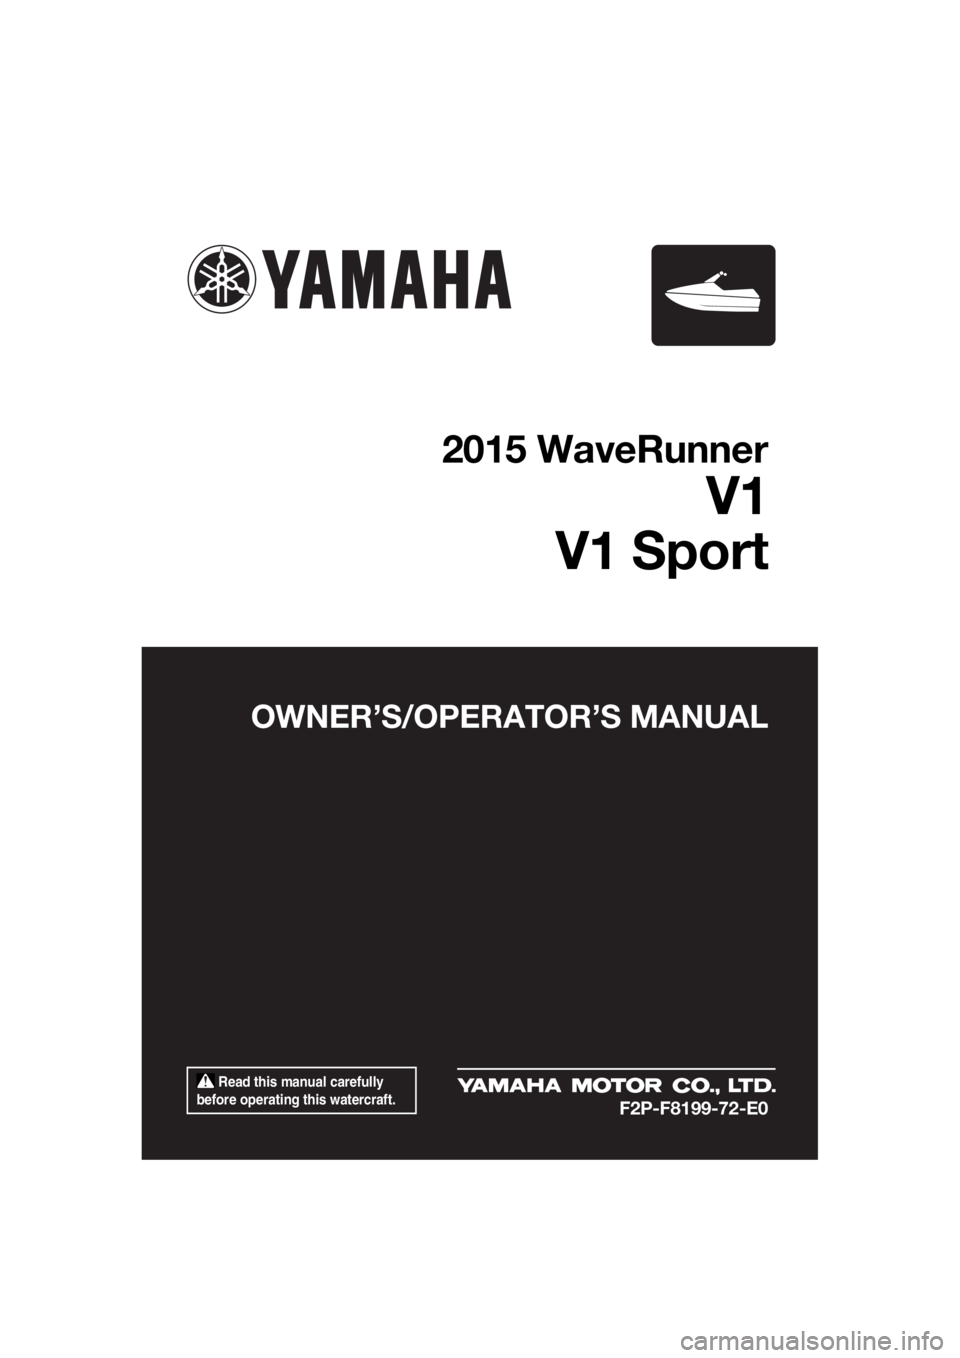 YAMAHA V1 SPORT 2015  Owners Manual  Read this manual carefully 
before operating this watercraft.
OWNER’S/OPERATOR’S MANUAL
2015 WaveRunner
V1
V1 Sport
F2P-F8199-72-E0
UF2P72E0.book  Page 1  Tuesday, August 26, 2014  10:08 AM 